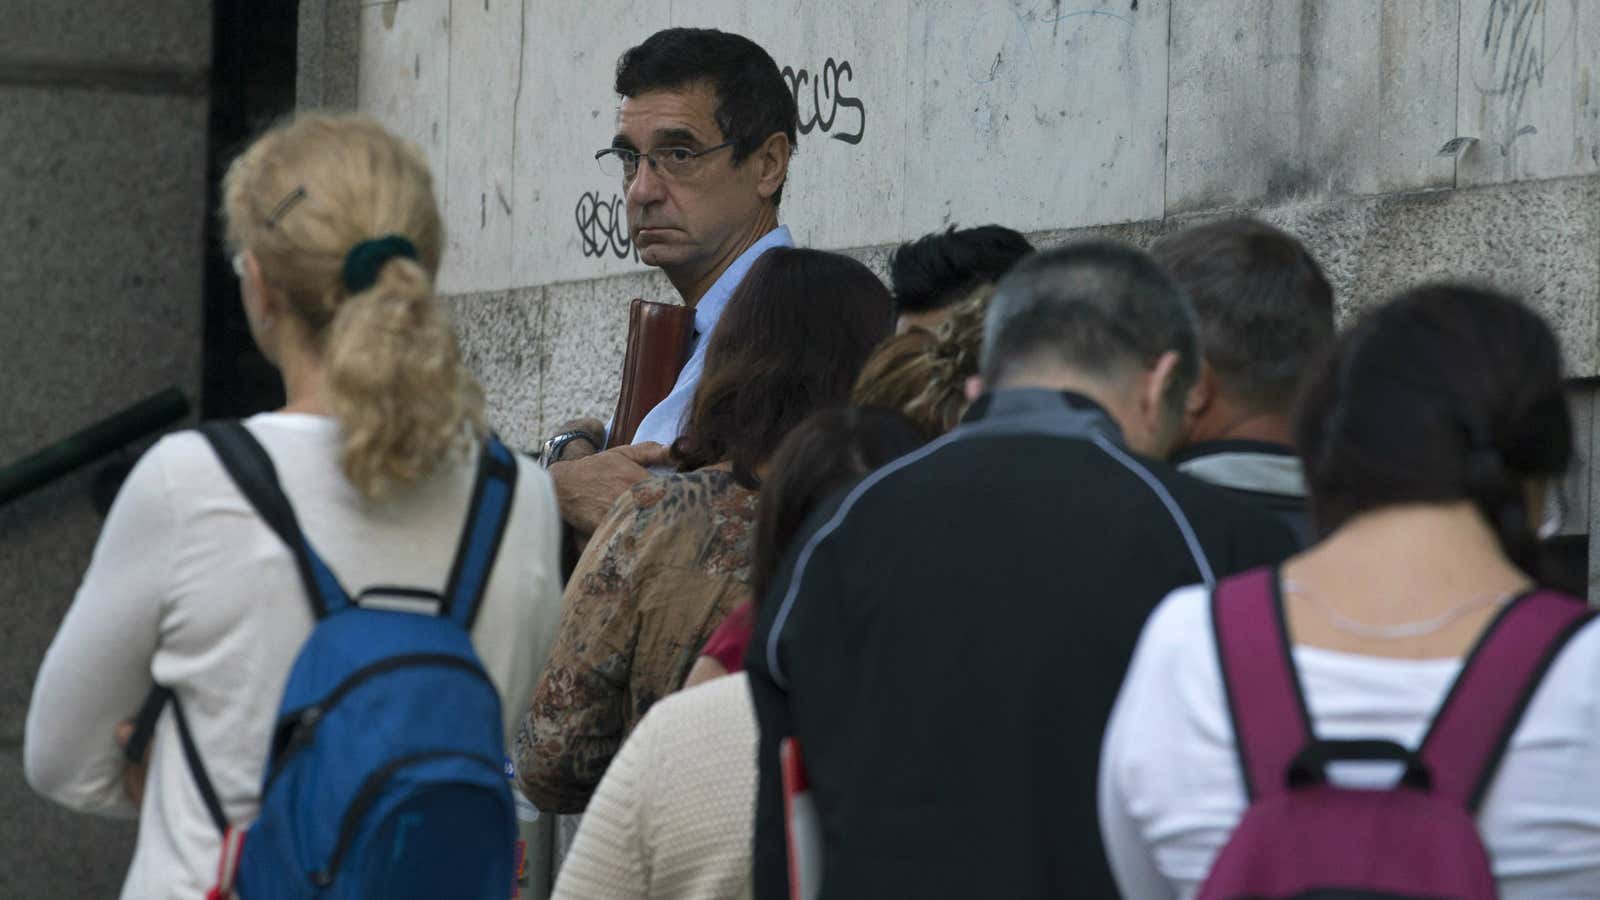 Spain’s unemployment line shows the ubiquity of workers affected.